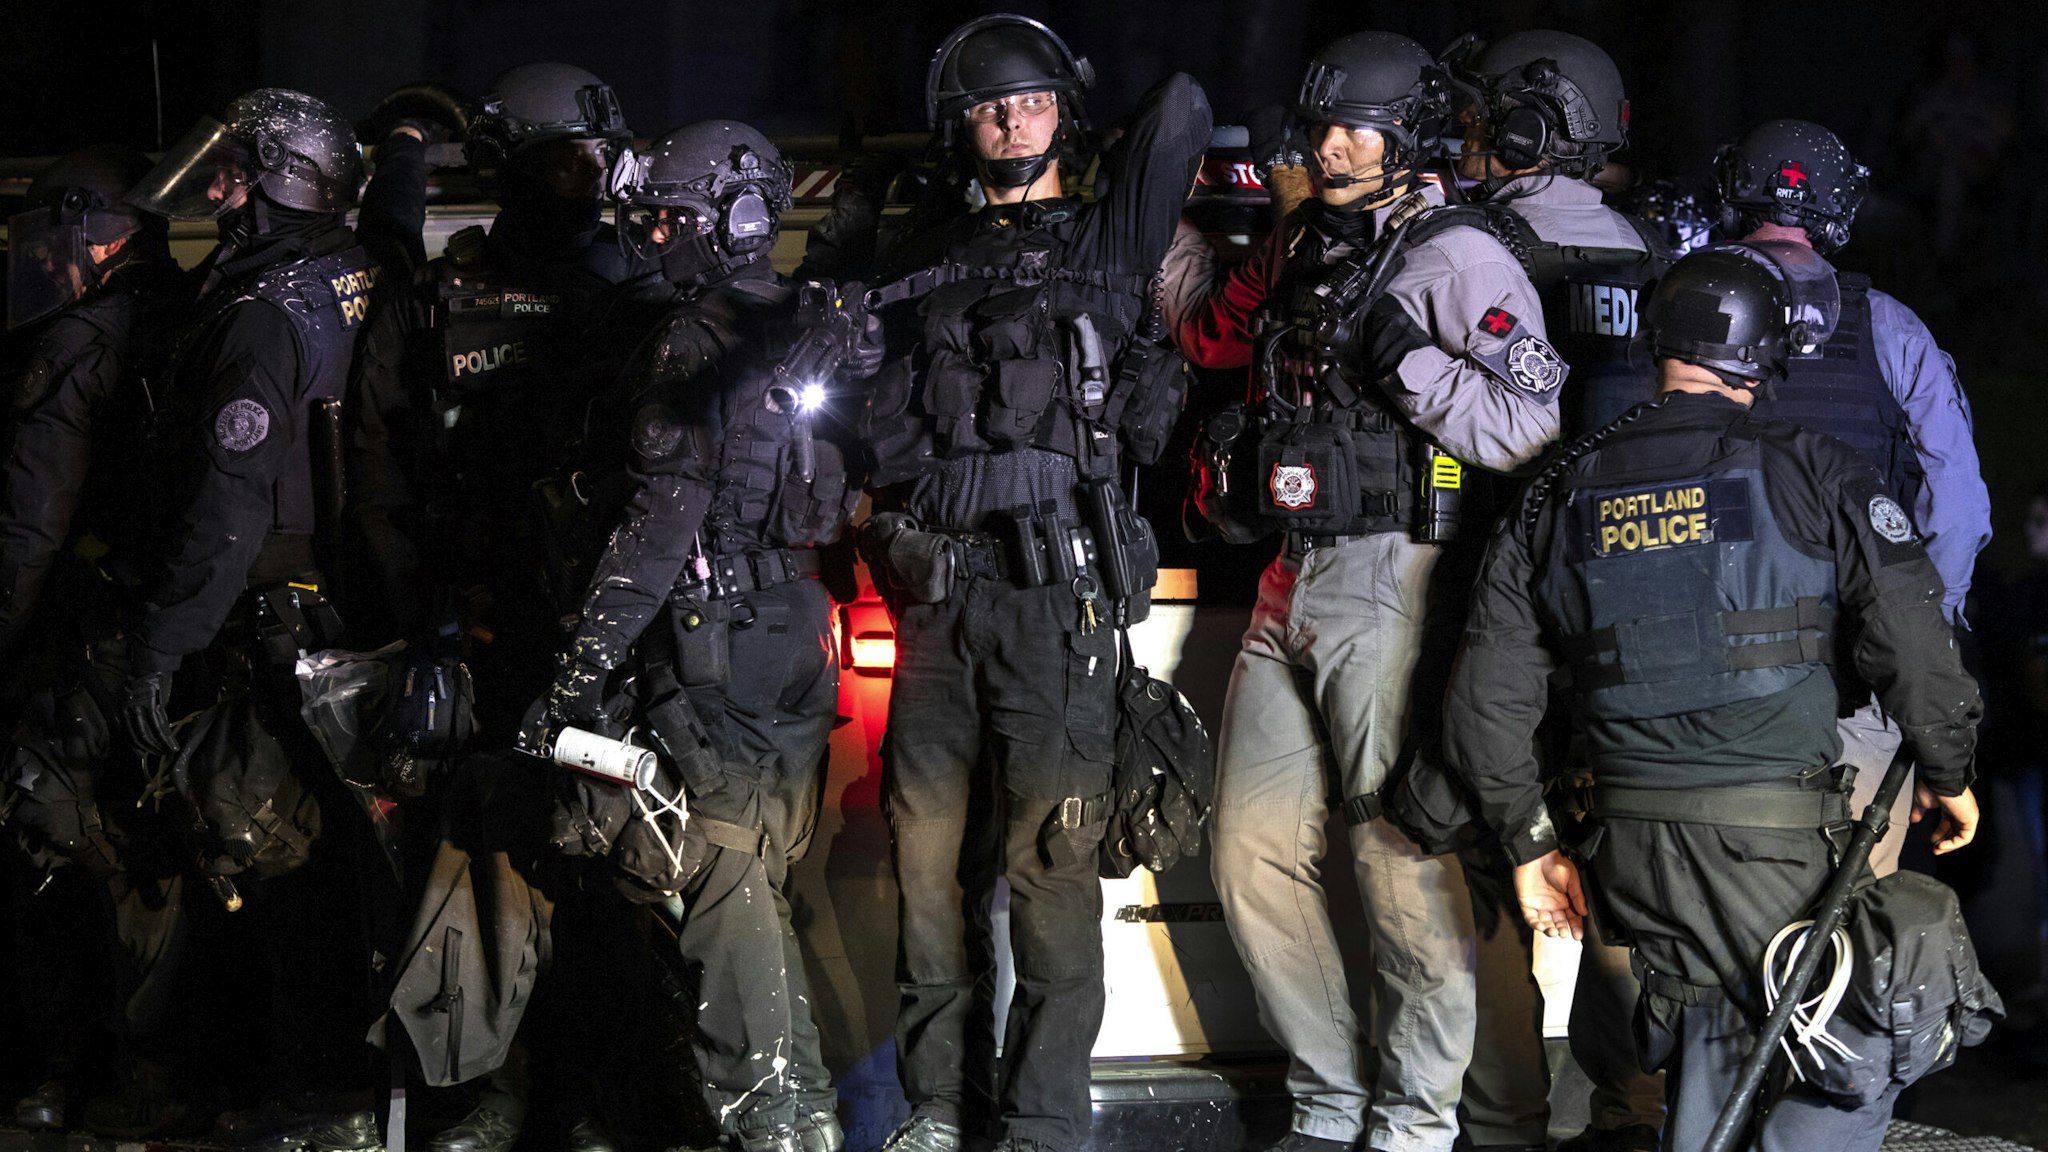 Portland police are seen in riot gear during a standoff with protesters in Portland, Oregon on August 16, 2020. Protests have continued for the 80th consecutive night in Portland since the killing of George Floyd.